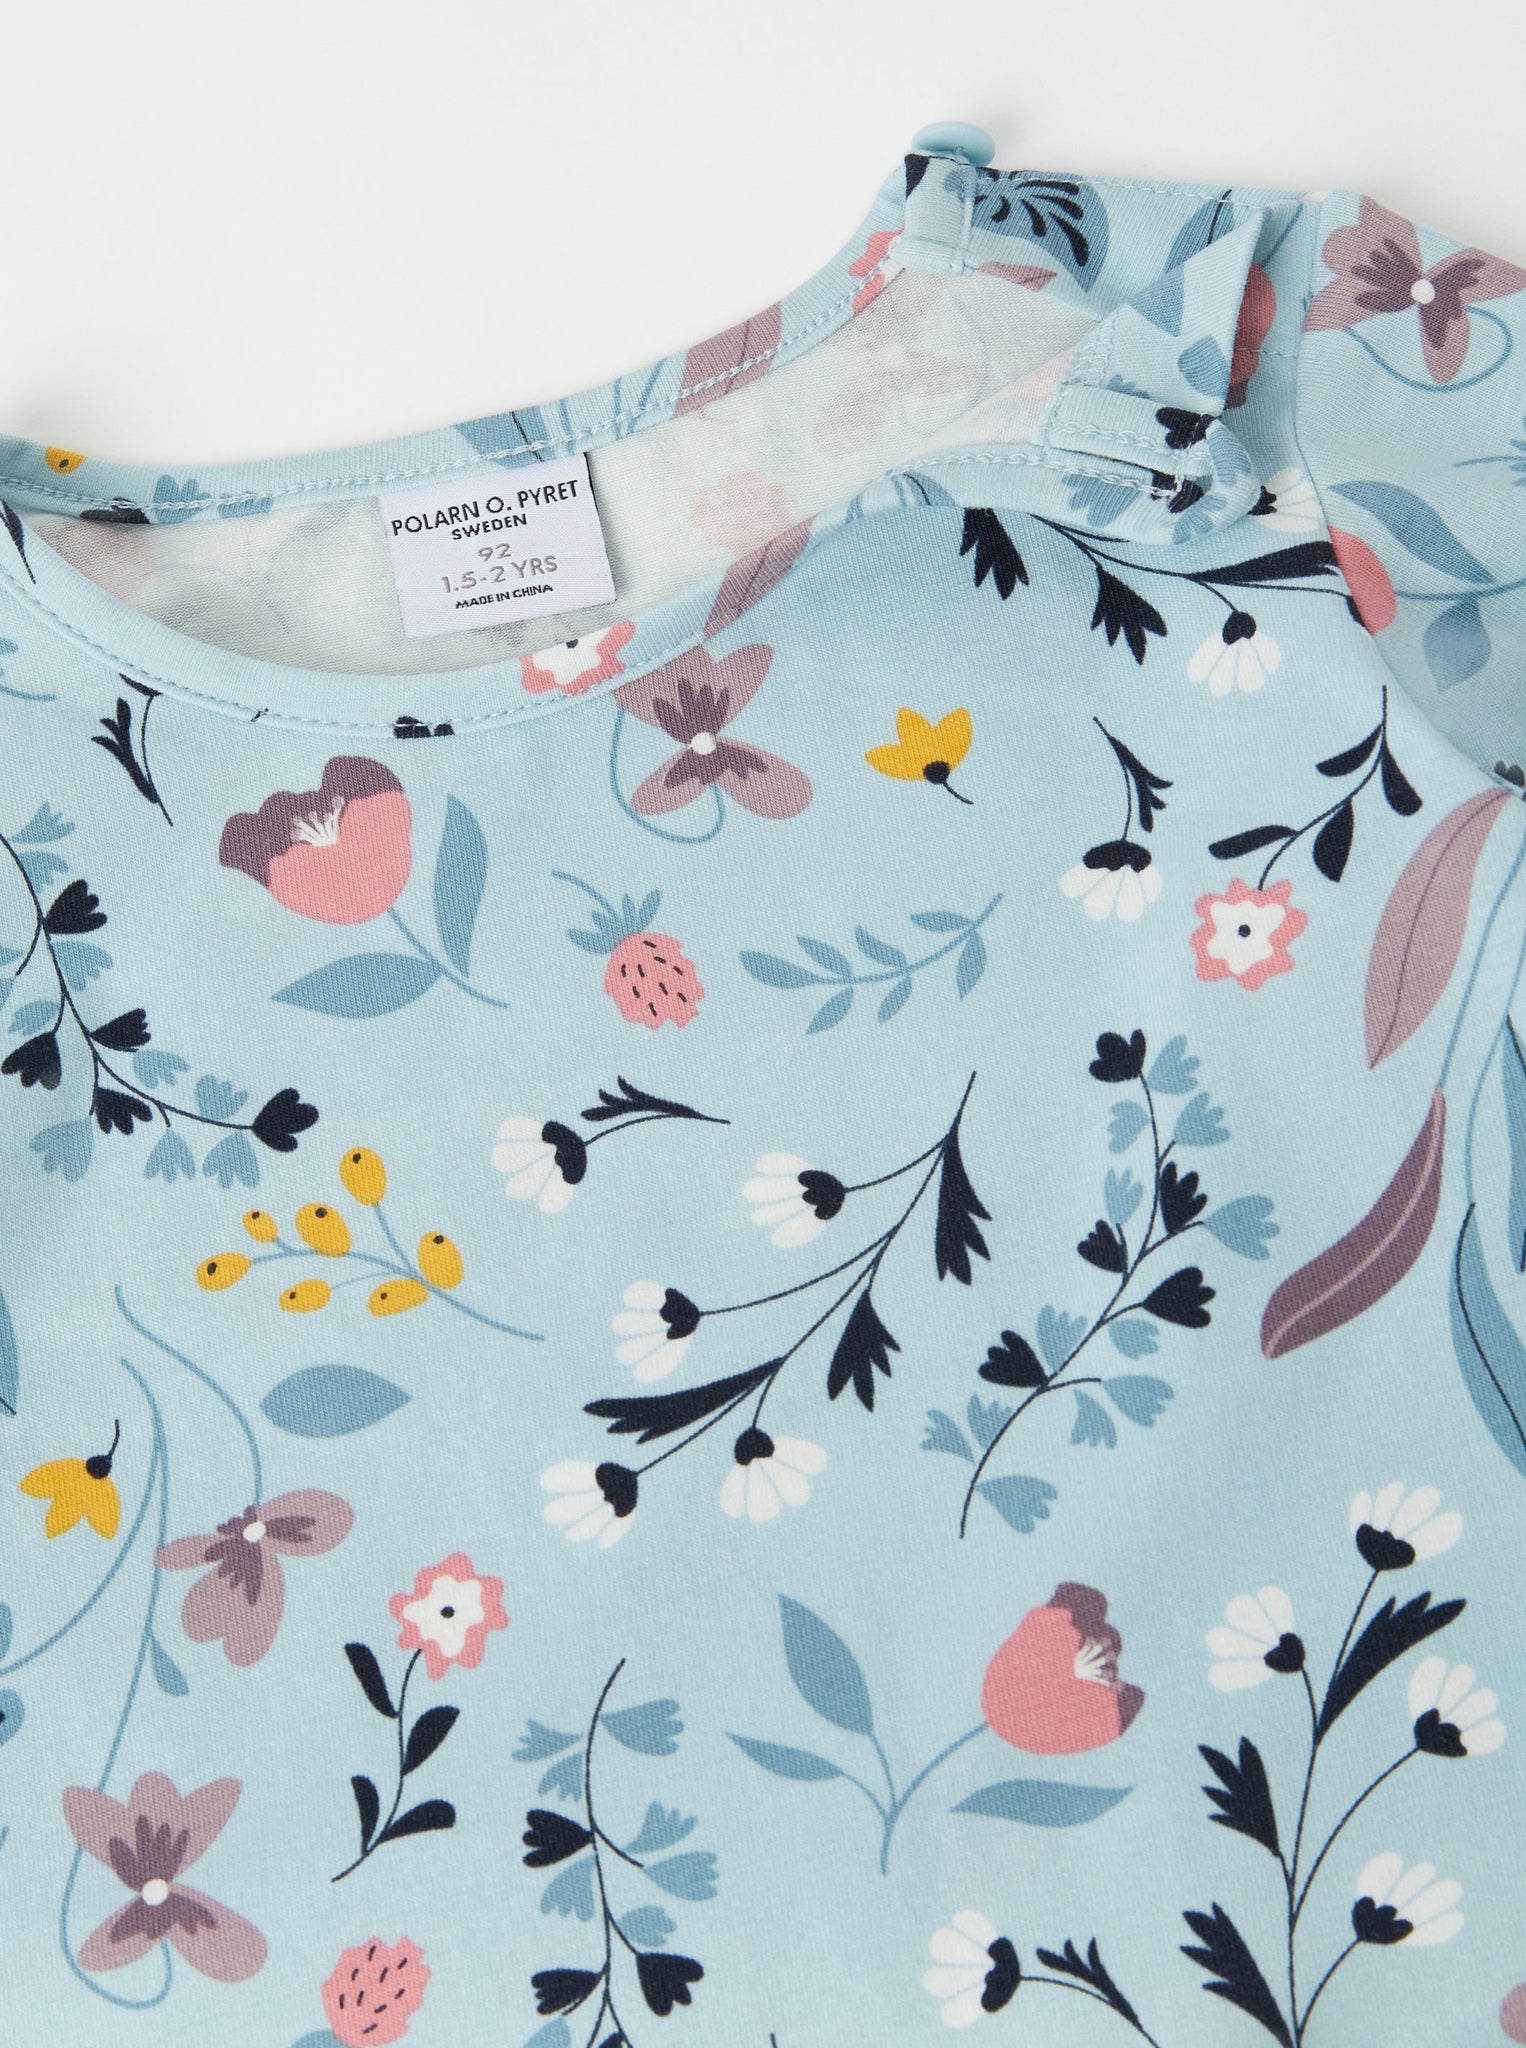 Organic Cotton Blue Floral Girls Top from the Polarn O. Pyret kidswear collection. Ethically produced kids clothing.